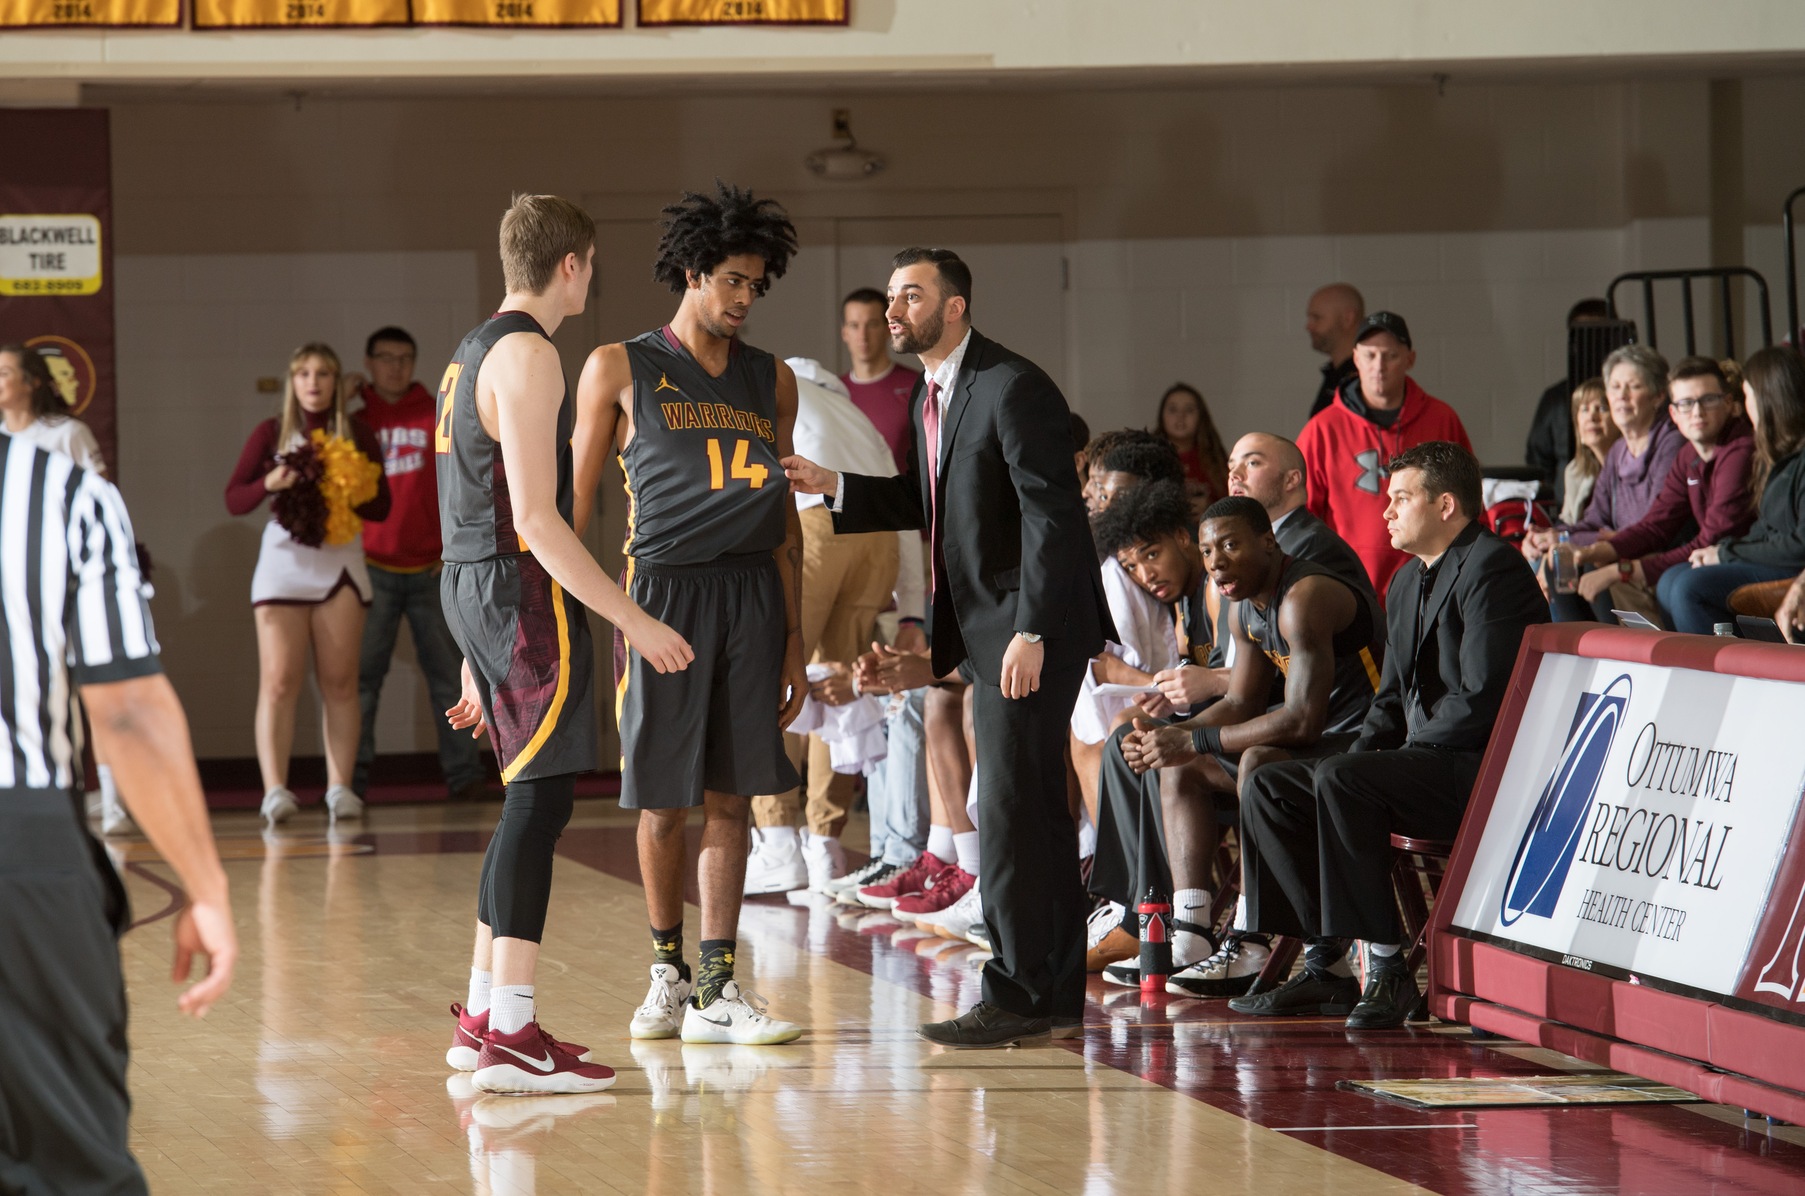 Dewey mentioned as one of JUCO basketball's most impactful coaches